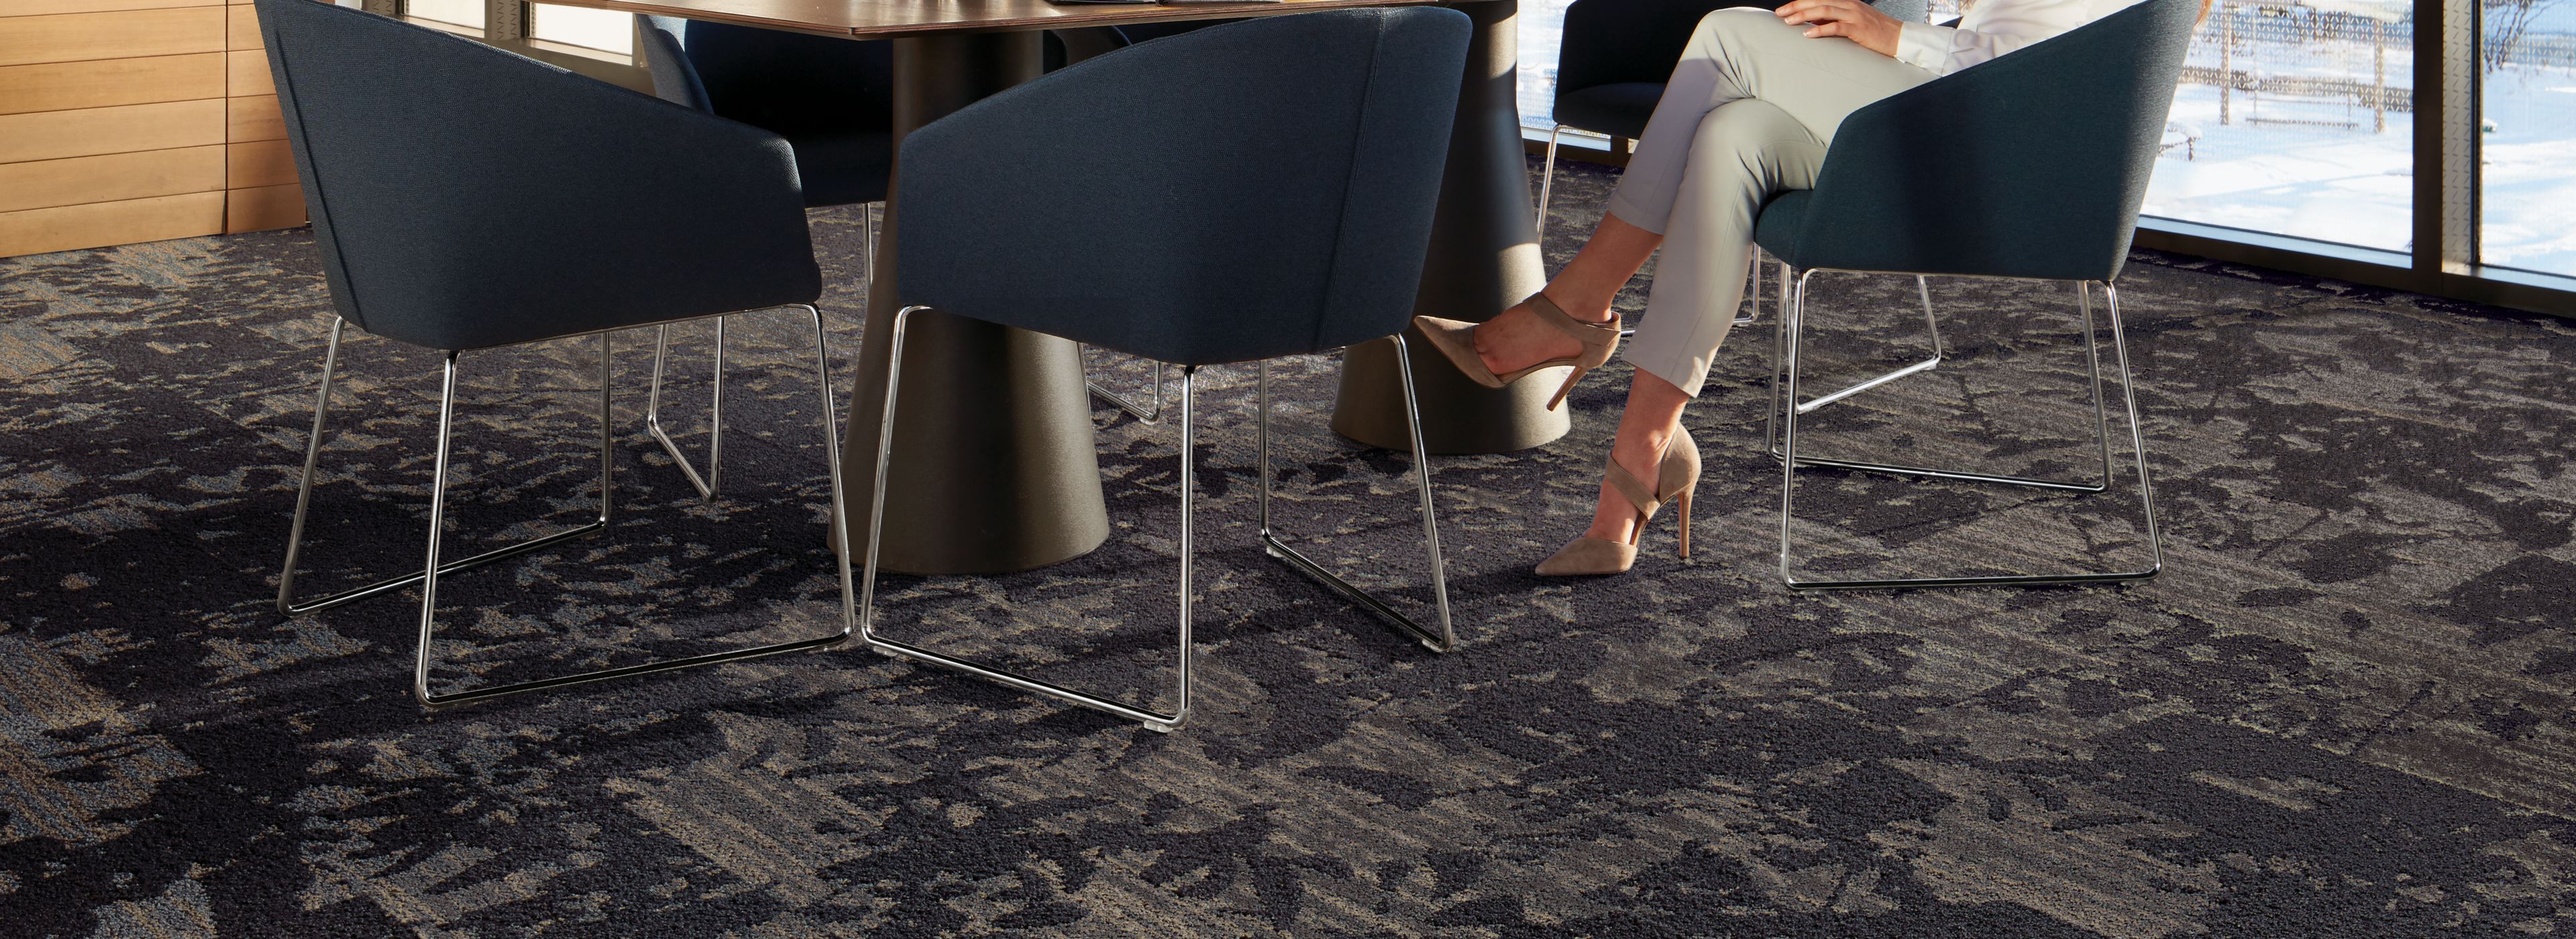 Interface Shading plank carpet tile in seating area with table and chairs imagen número 1